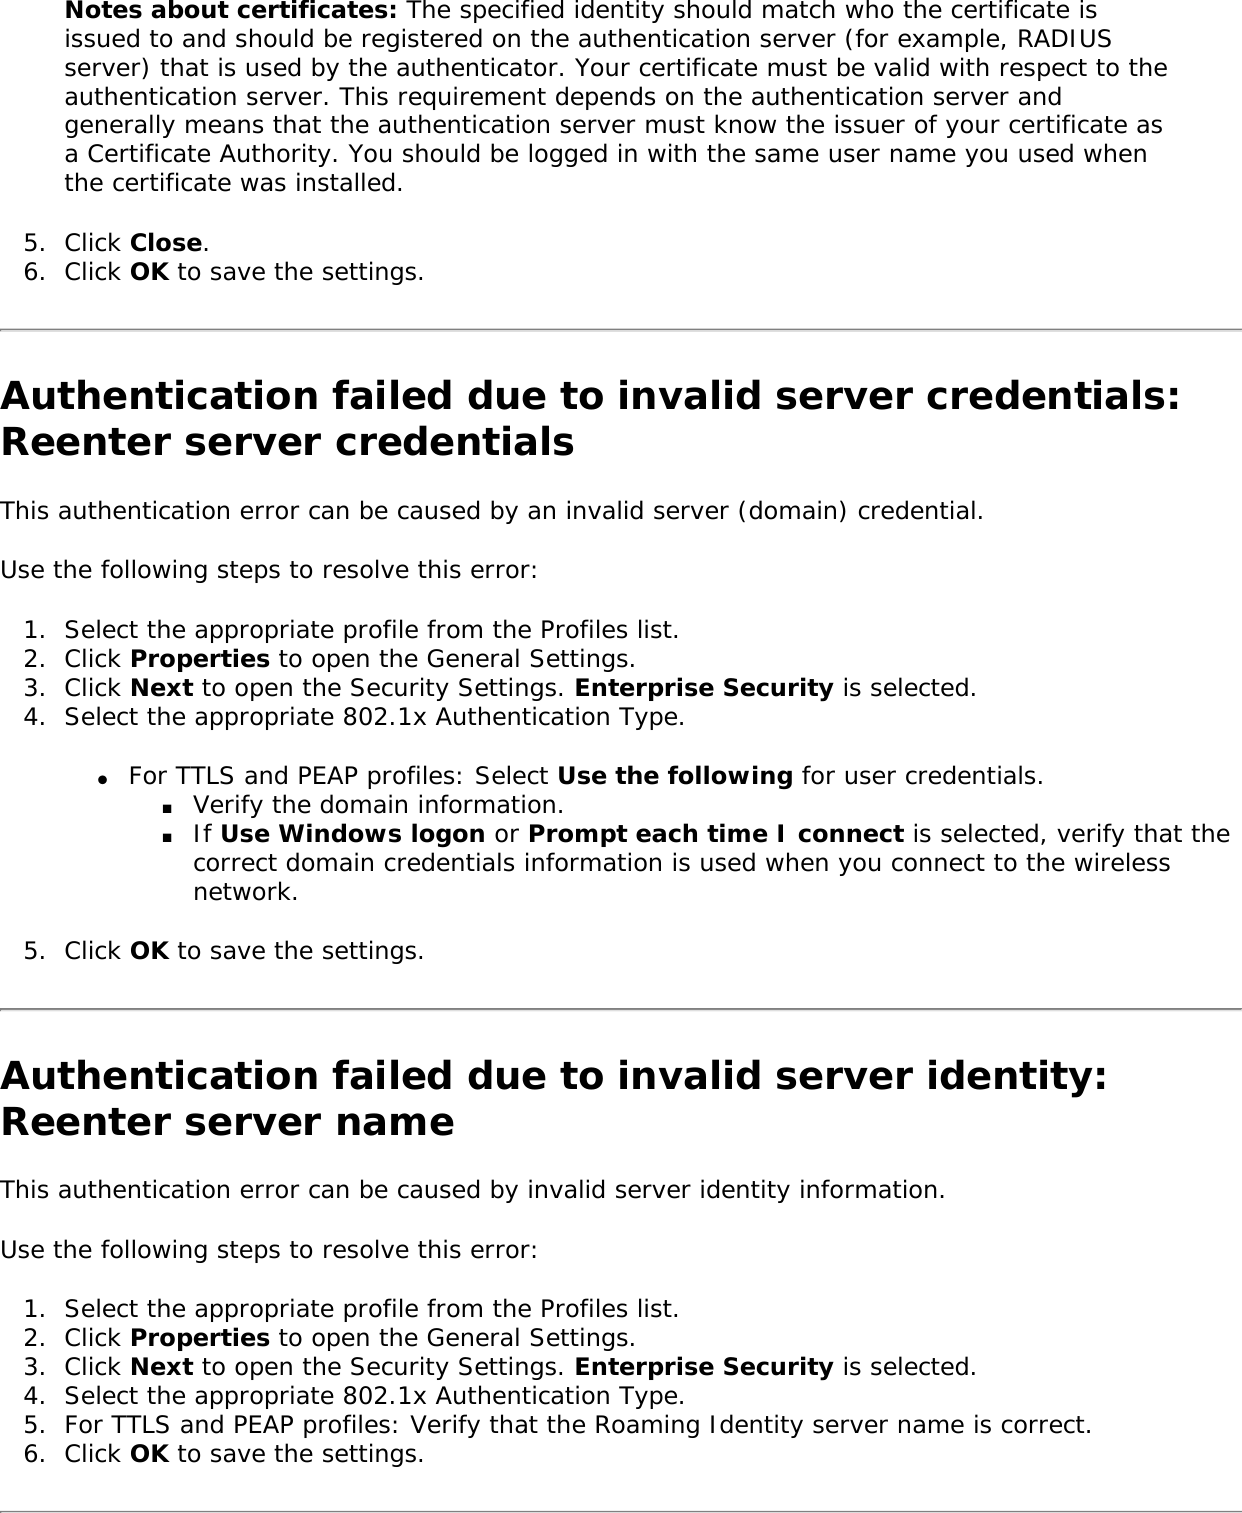 Notes about certificates: The specified identity should match who the certificate is issued to and should be registered on the authentication server (for example, RADIUS server) that is used by the authenticator. Your certificate must be valid with respect to the authentication server. This requirement depends on the authentication server and generally means that the authentication server must know the issuer of your certificate as a Certificate Authority. You should be logged in with the same user name you used when the certificate was installed. 5.  Click Close. 6.  Click OK to save the settings. Authentication failed due to invalid server credentials: Reenter server credentials This authentication error can be caused by an invalid server (domain) credential. Use the following steps to resolve this error: 1.  Select the appropriate profile from the Profiles list.2.  Click Properties to open the General Settings.3.  Click Next to open the Security Settings. Enterprise Security is selected. 4.  Select the appropriate 802.1x Authentication Type. ●     For TTLS and PEAP profiles: Select Use the following for user credentials. ■     Verify the domain information. ■     If Use Windows logon or Prompt each time I connect is selected, verify that the correct domain credentials information is used when you connect to the wireless network. 5.  Click OK to save the settings. Authentication failed due to invalid server identity: Reenter server name This authentication error can be caused by invalid server identity information. Use the following steps to resolve this error: 1.  Select the appropriate profile from the Profiles list. 2.  Click Properties to open the General Settings.3.  Click Next to open the Security Settings. Enterprise Security is selected. 4.  Select the appropriate 802.1x Authentication Type. 5.  For TTLS and PEAP profiles: Verify that the Roaming Identity server name is correct. 6.  Click OK to save the settings. 